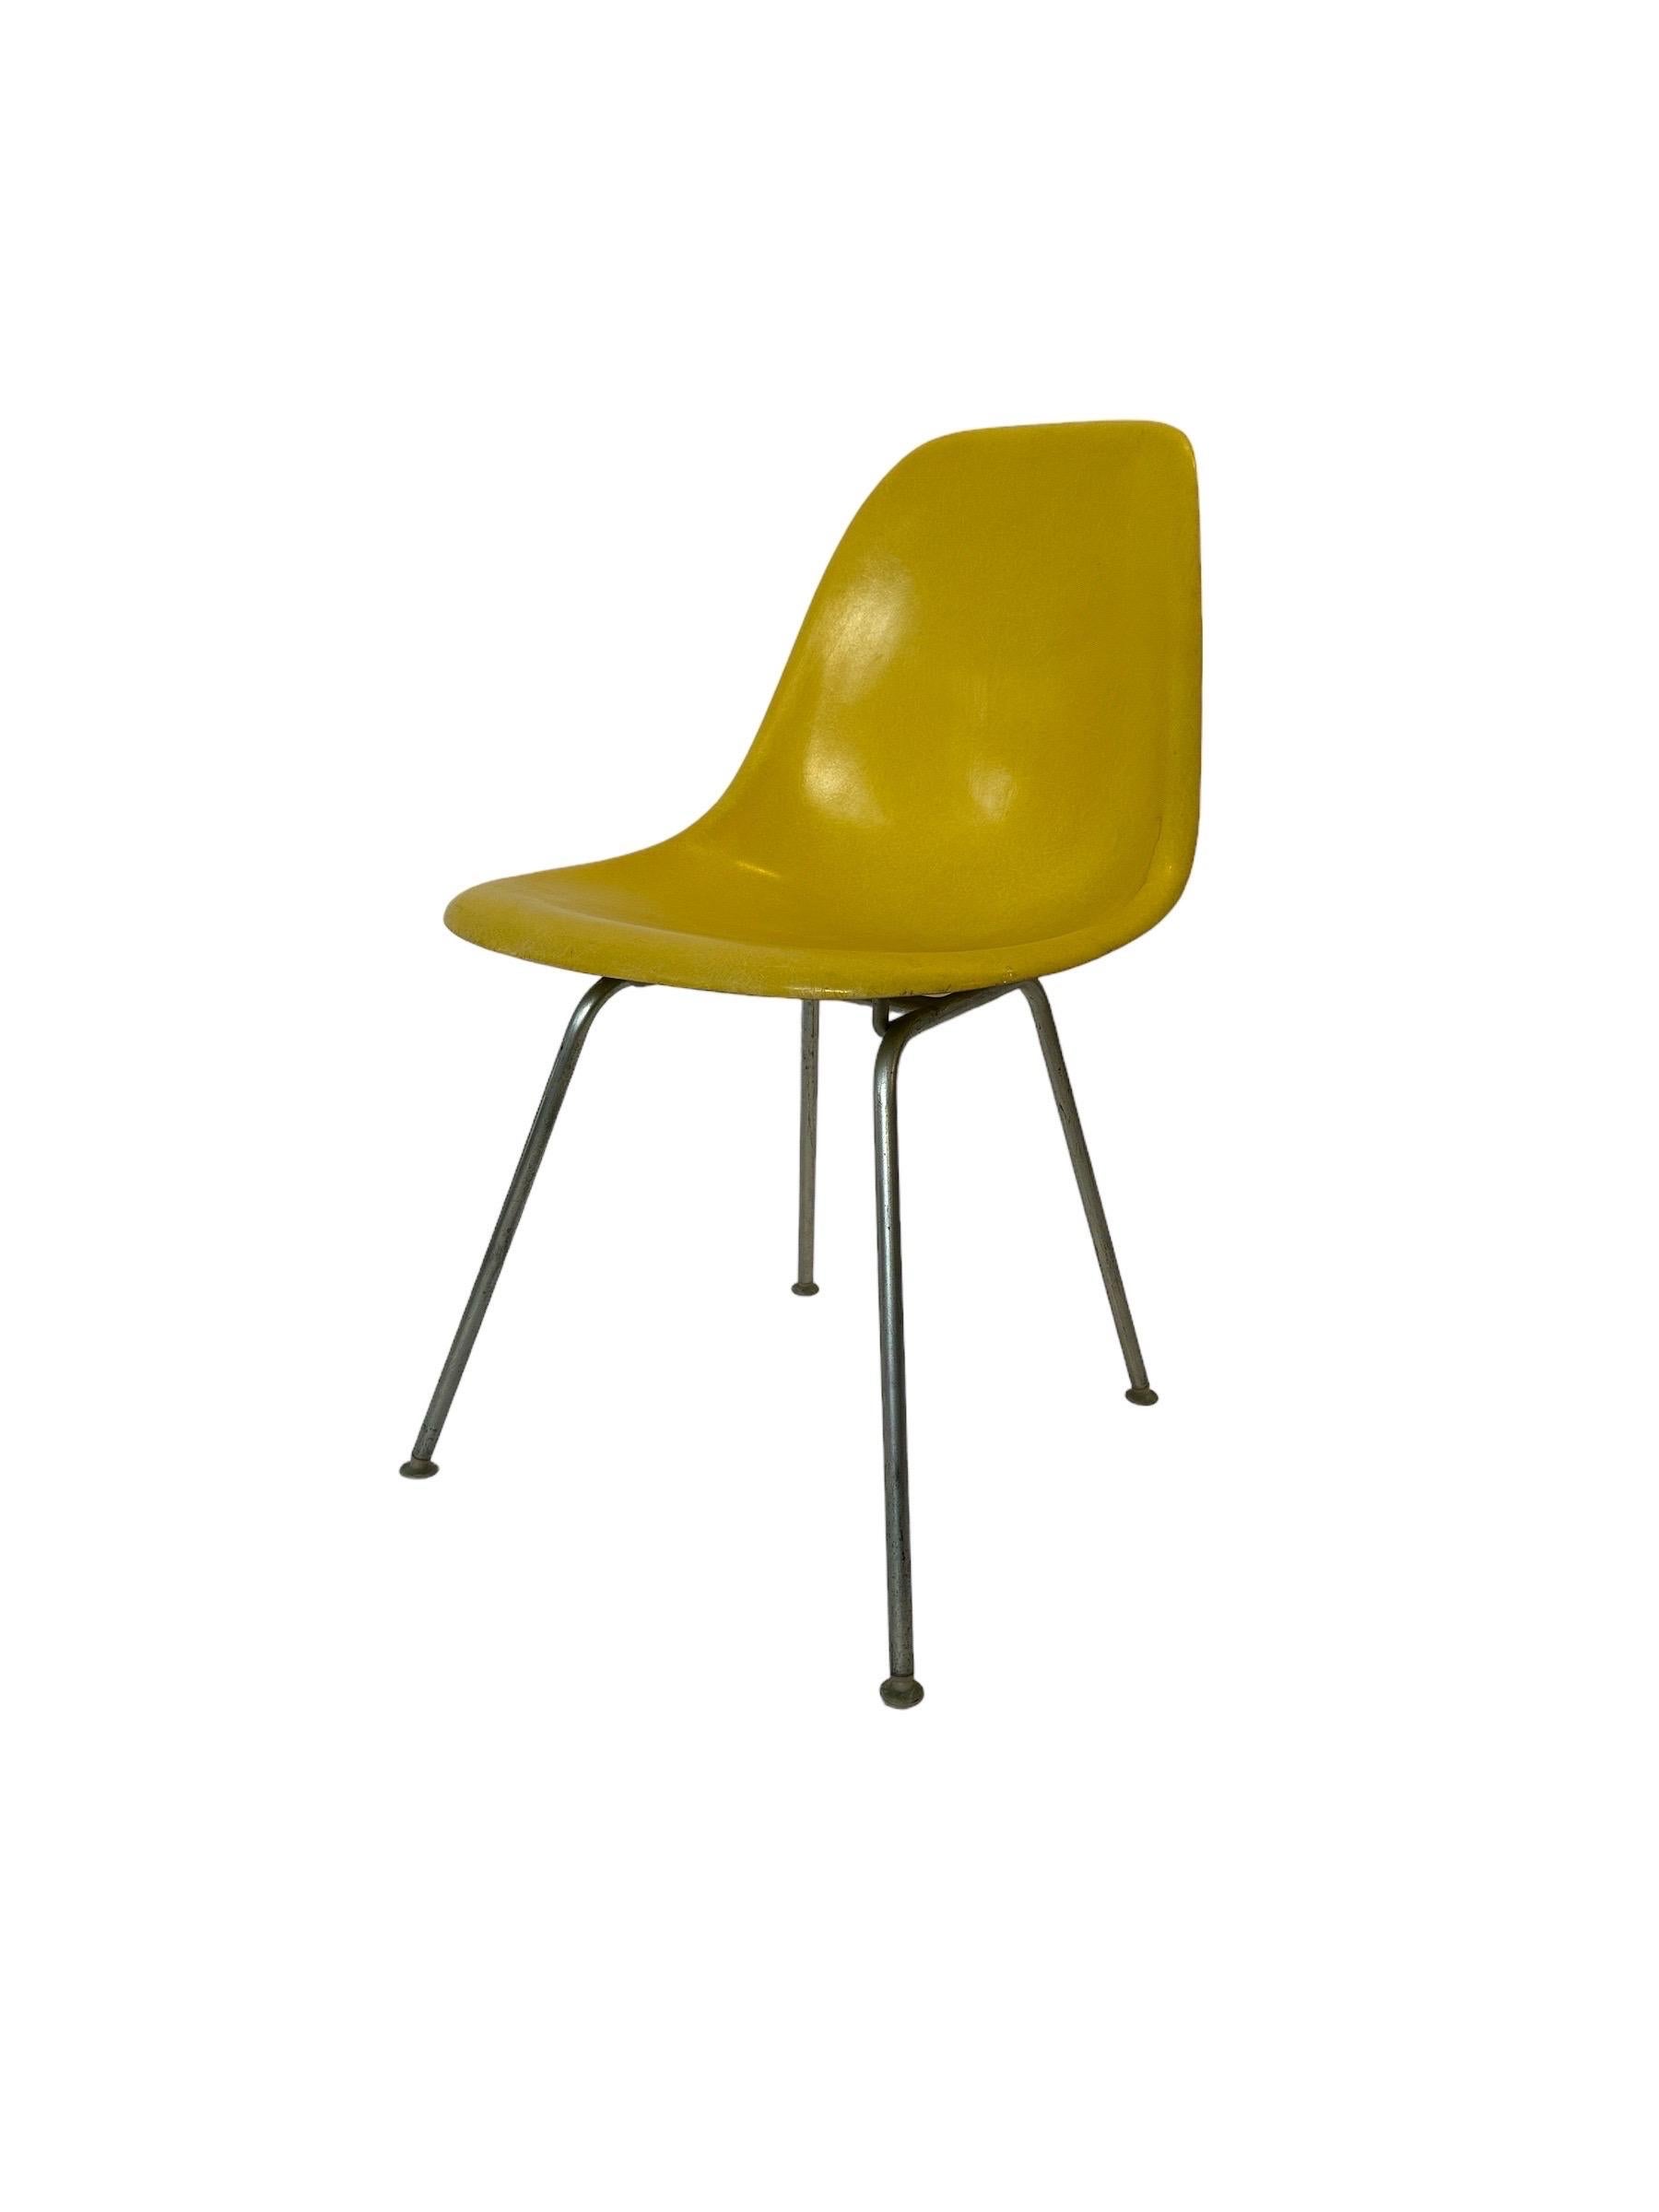 Classic Herman Miller fiberglass diamond chair. Designed by Charles and Ray Eames. circa 1970s production. Model DSX. This shade is called “Brilliant Yellow” and is one of the less common hues. Shell with all screws and feet intact. May ship